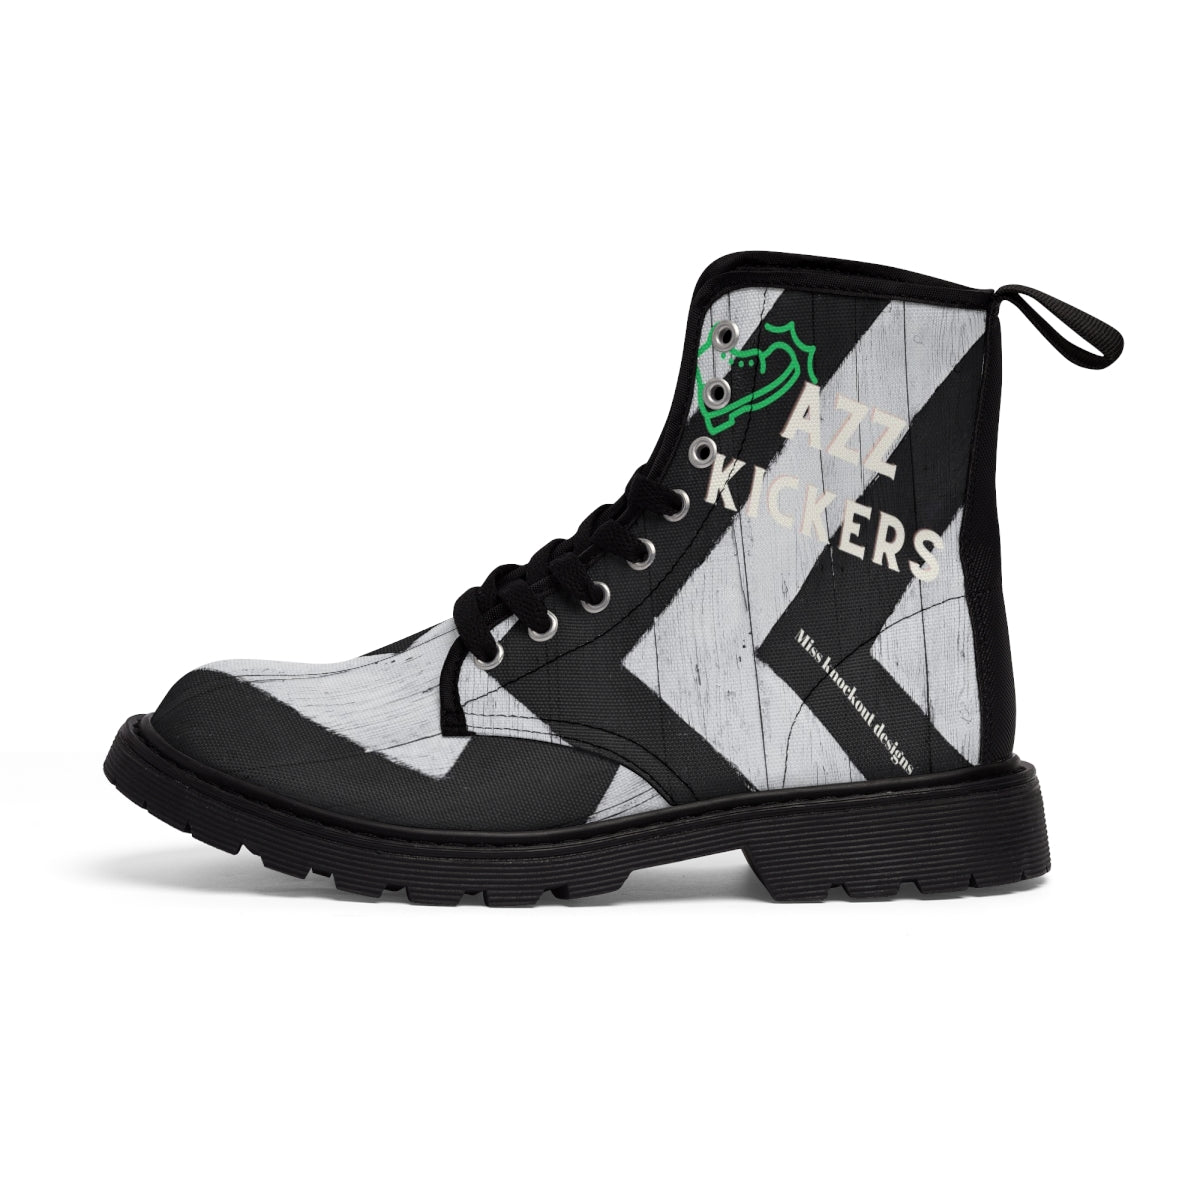 Miss knockout "Azz Kickers" Women's Canvas Boots  Miss knockout ™ Merchandise